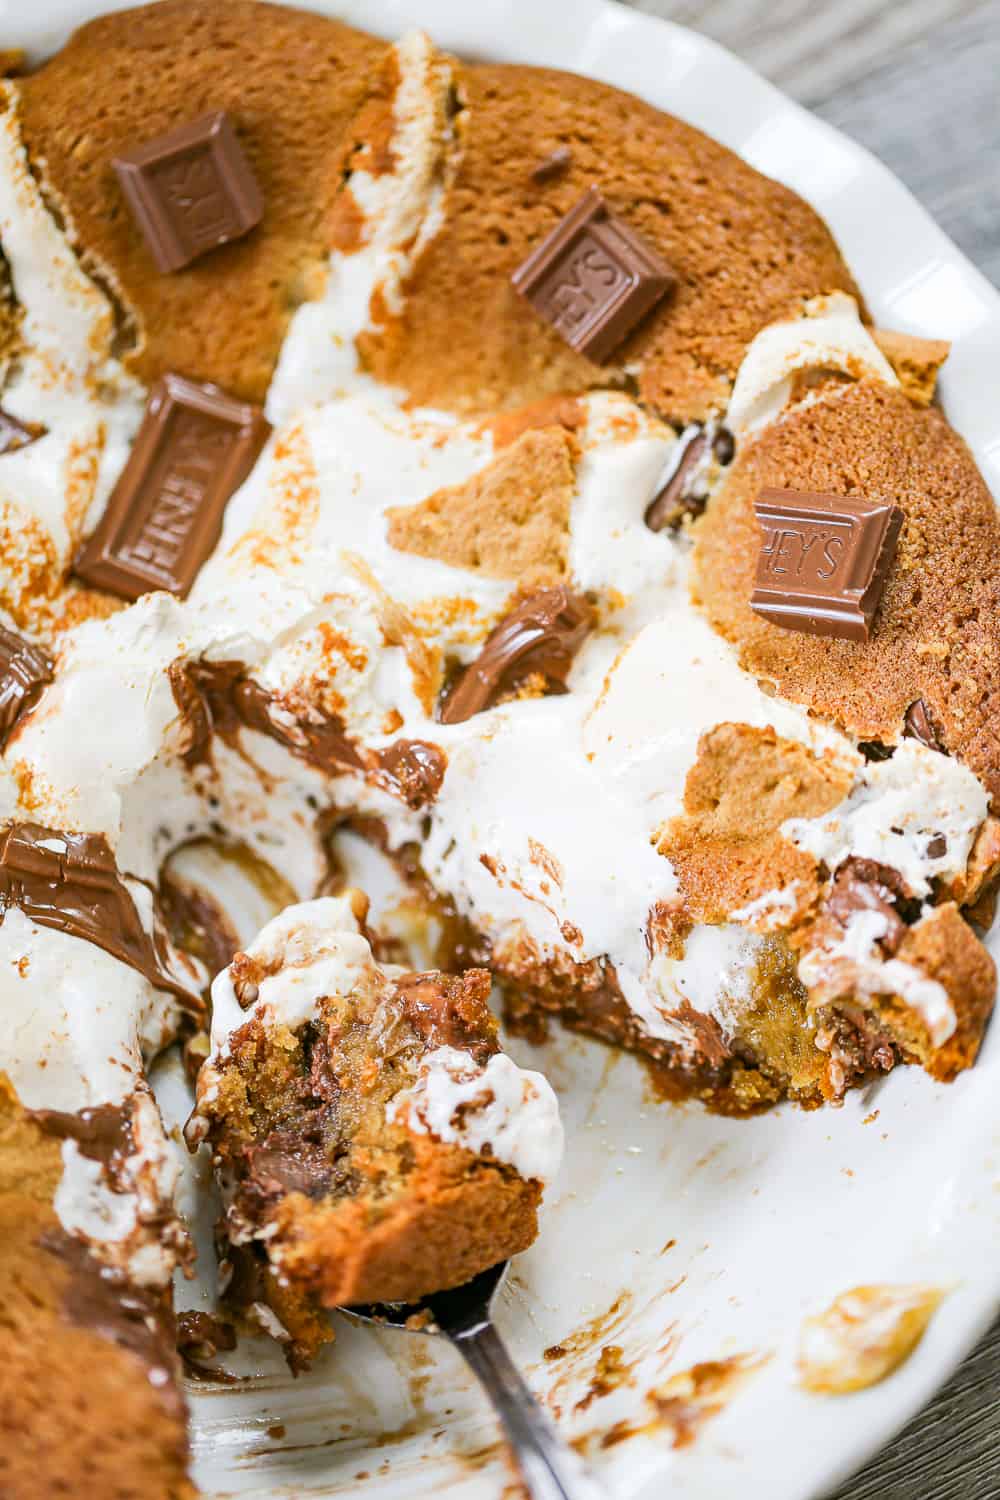 s'mores pie recipe! Serve warm with a scoop of vanilla ice cream or sprinkle this pie with some sea salt. You can even drizzle on some hot fudge or caramel sauce to make it extra divine!  Best served the same day, but leftovers can be stored for 2-3 days later for yummy snacking!  Microwave to get the gooey!